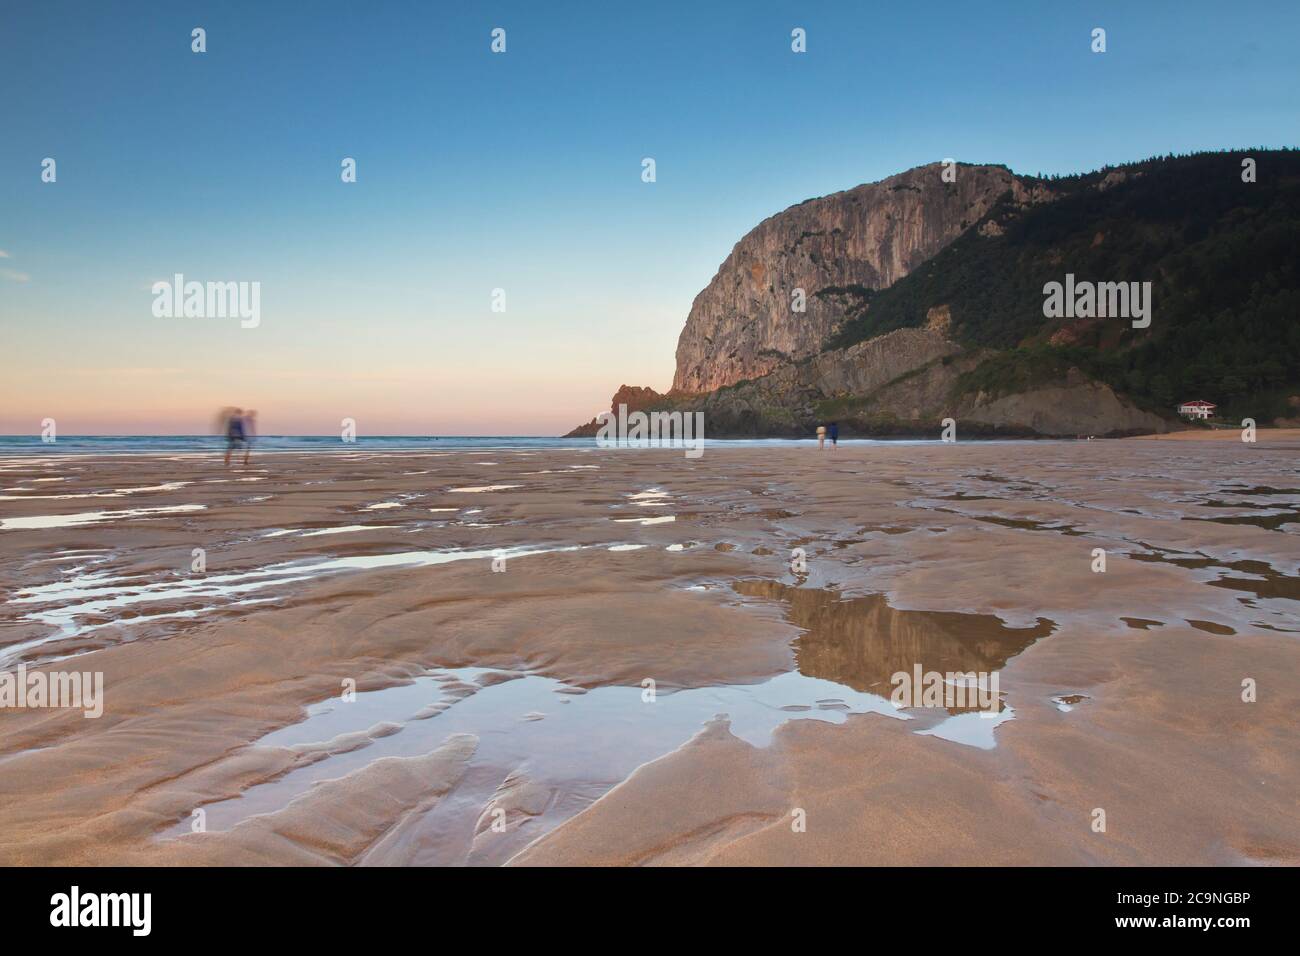 Ibarrangelu, Bizkaia/Basque Country; Sept. 26, 2015. People strolling at sunset on Laga beach at low tide. Stock Photo